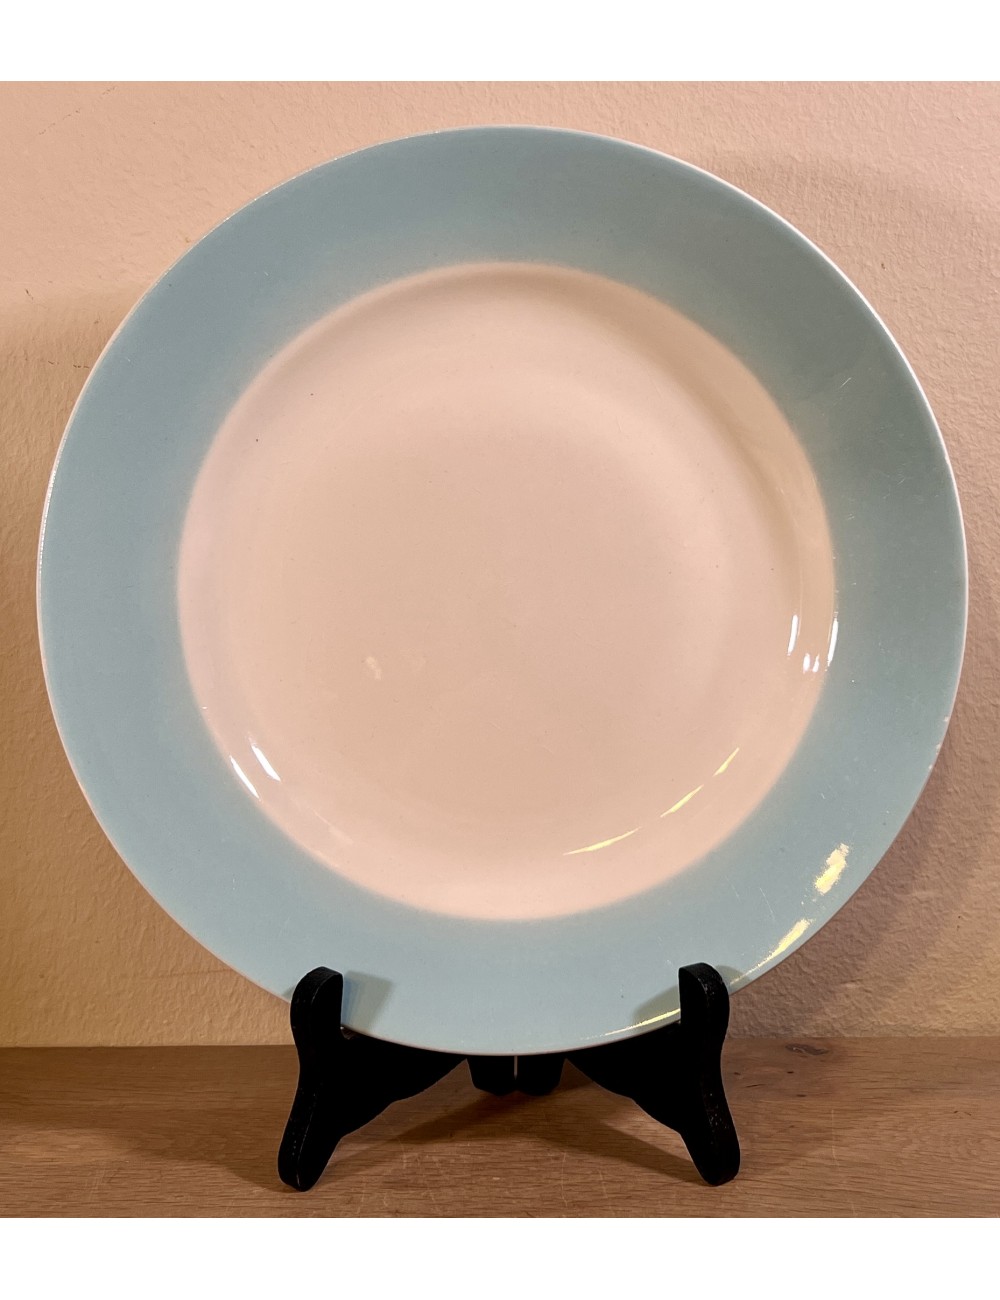 Deep plate / Soup plate / Pasta plate - unmarked - version with an azure border of 3.3 cm.